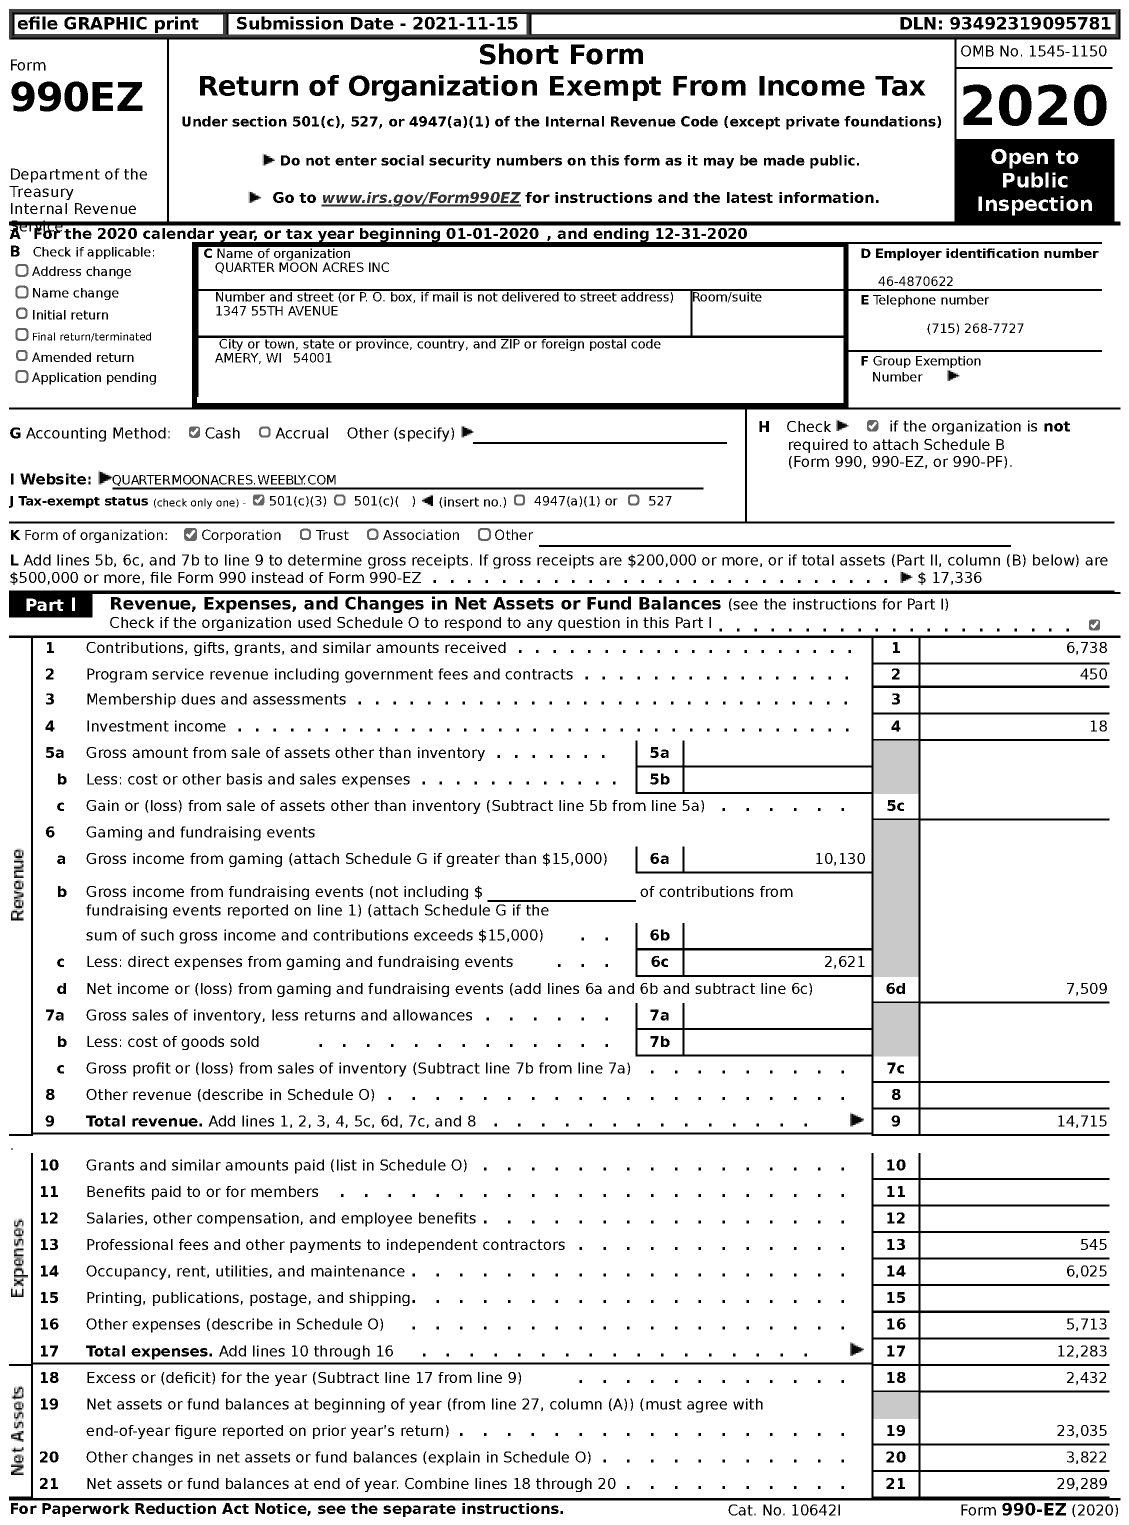 Image of first page of 2020 Form 990EZ for Quarter Moon Acres